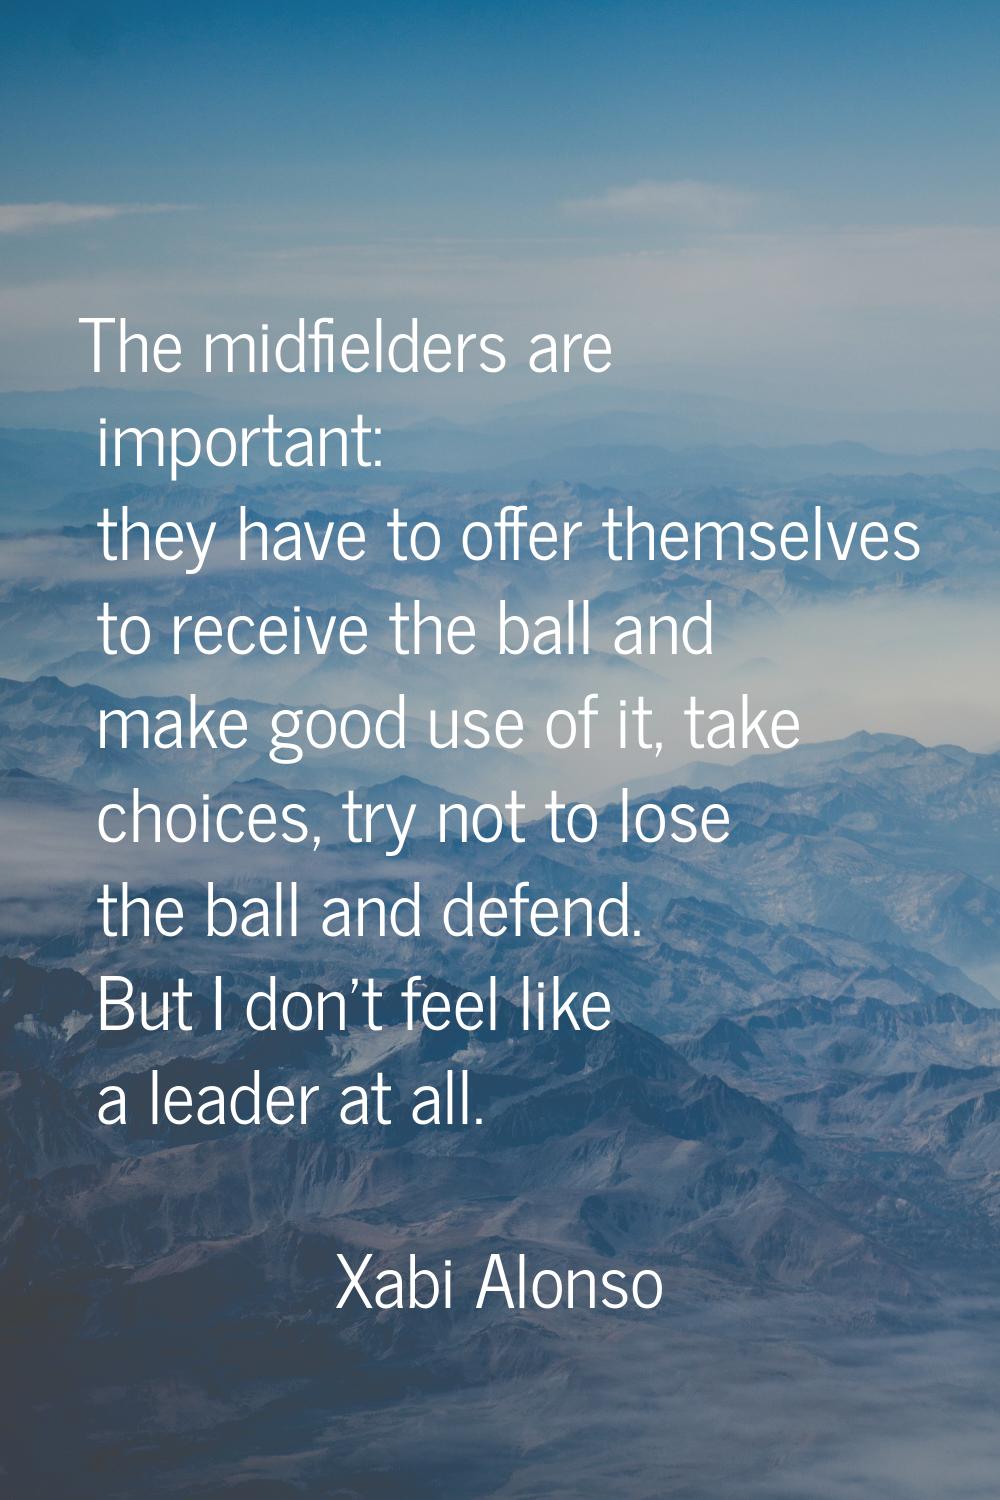 The midfielders are important: they have to offer themselves to receive the ball and make good use 